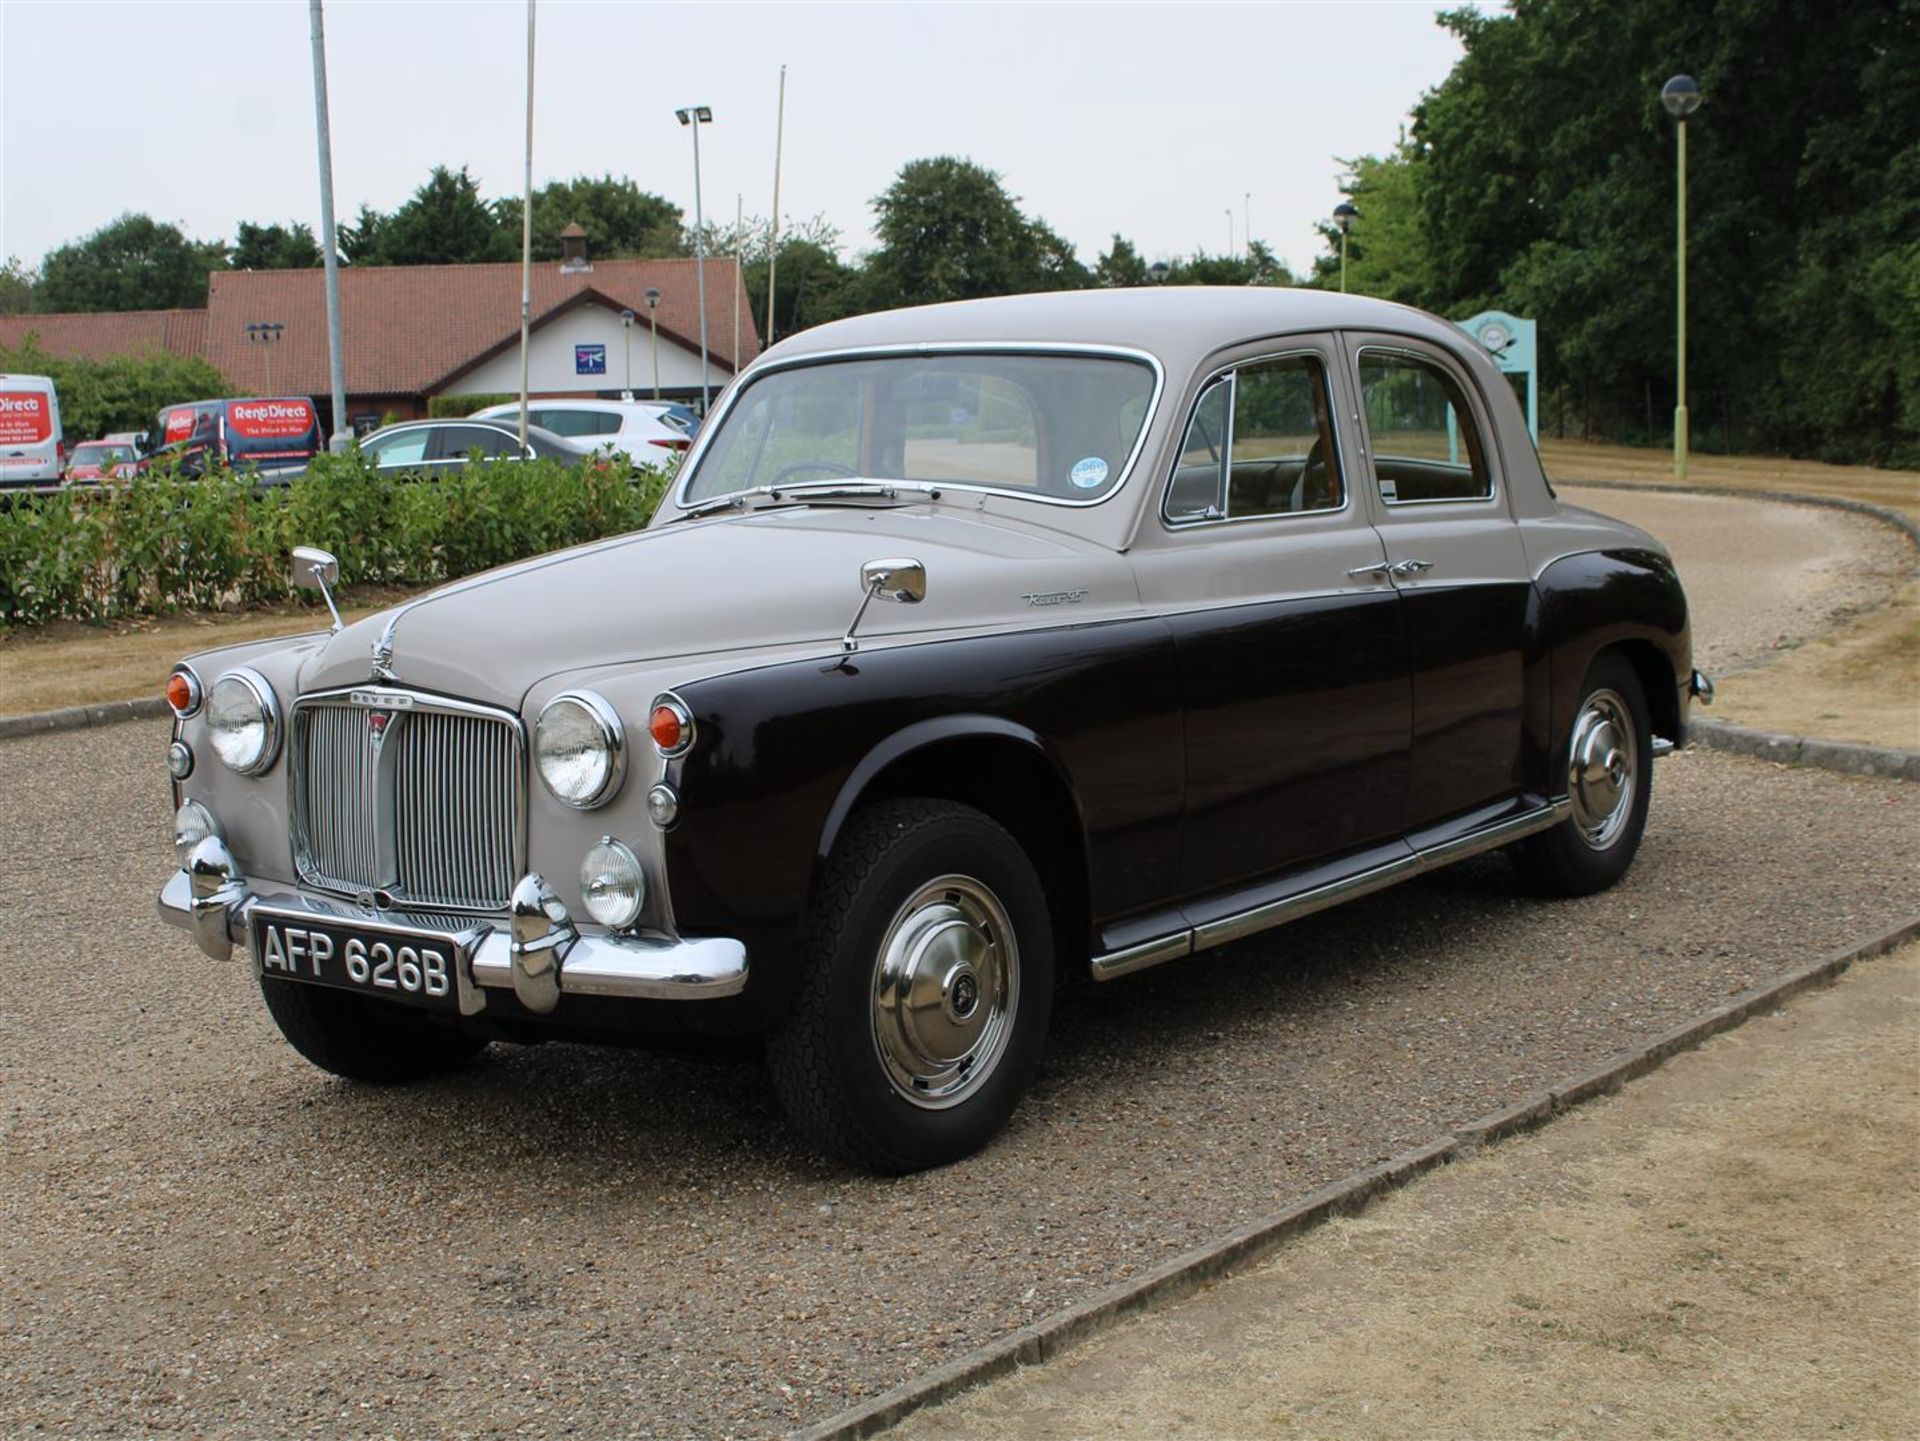 1964 Rover P4 95 Saloon - Image 3 of 23